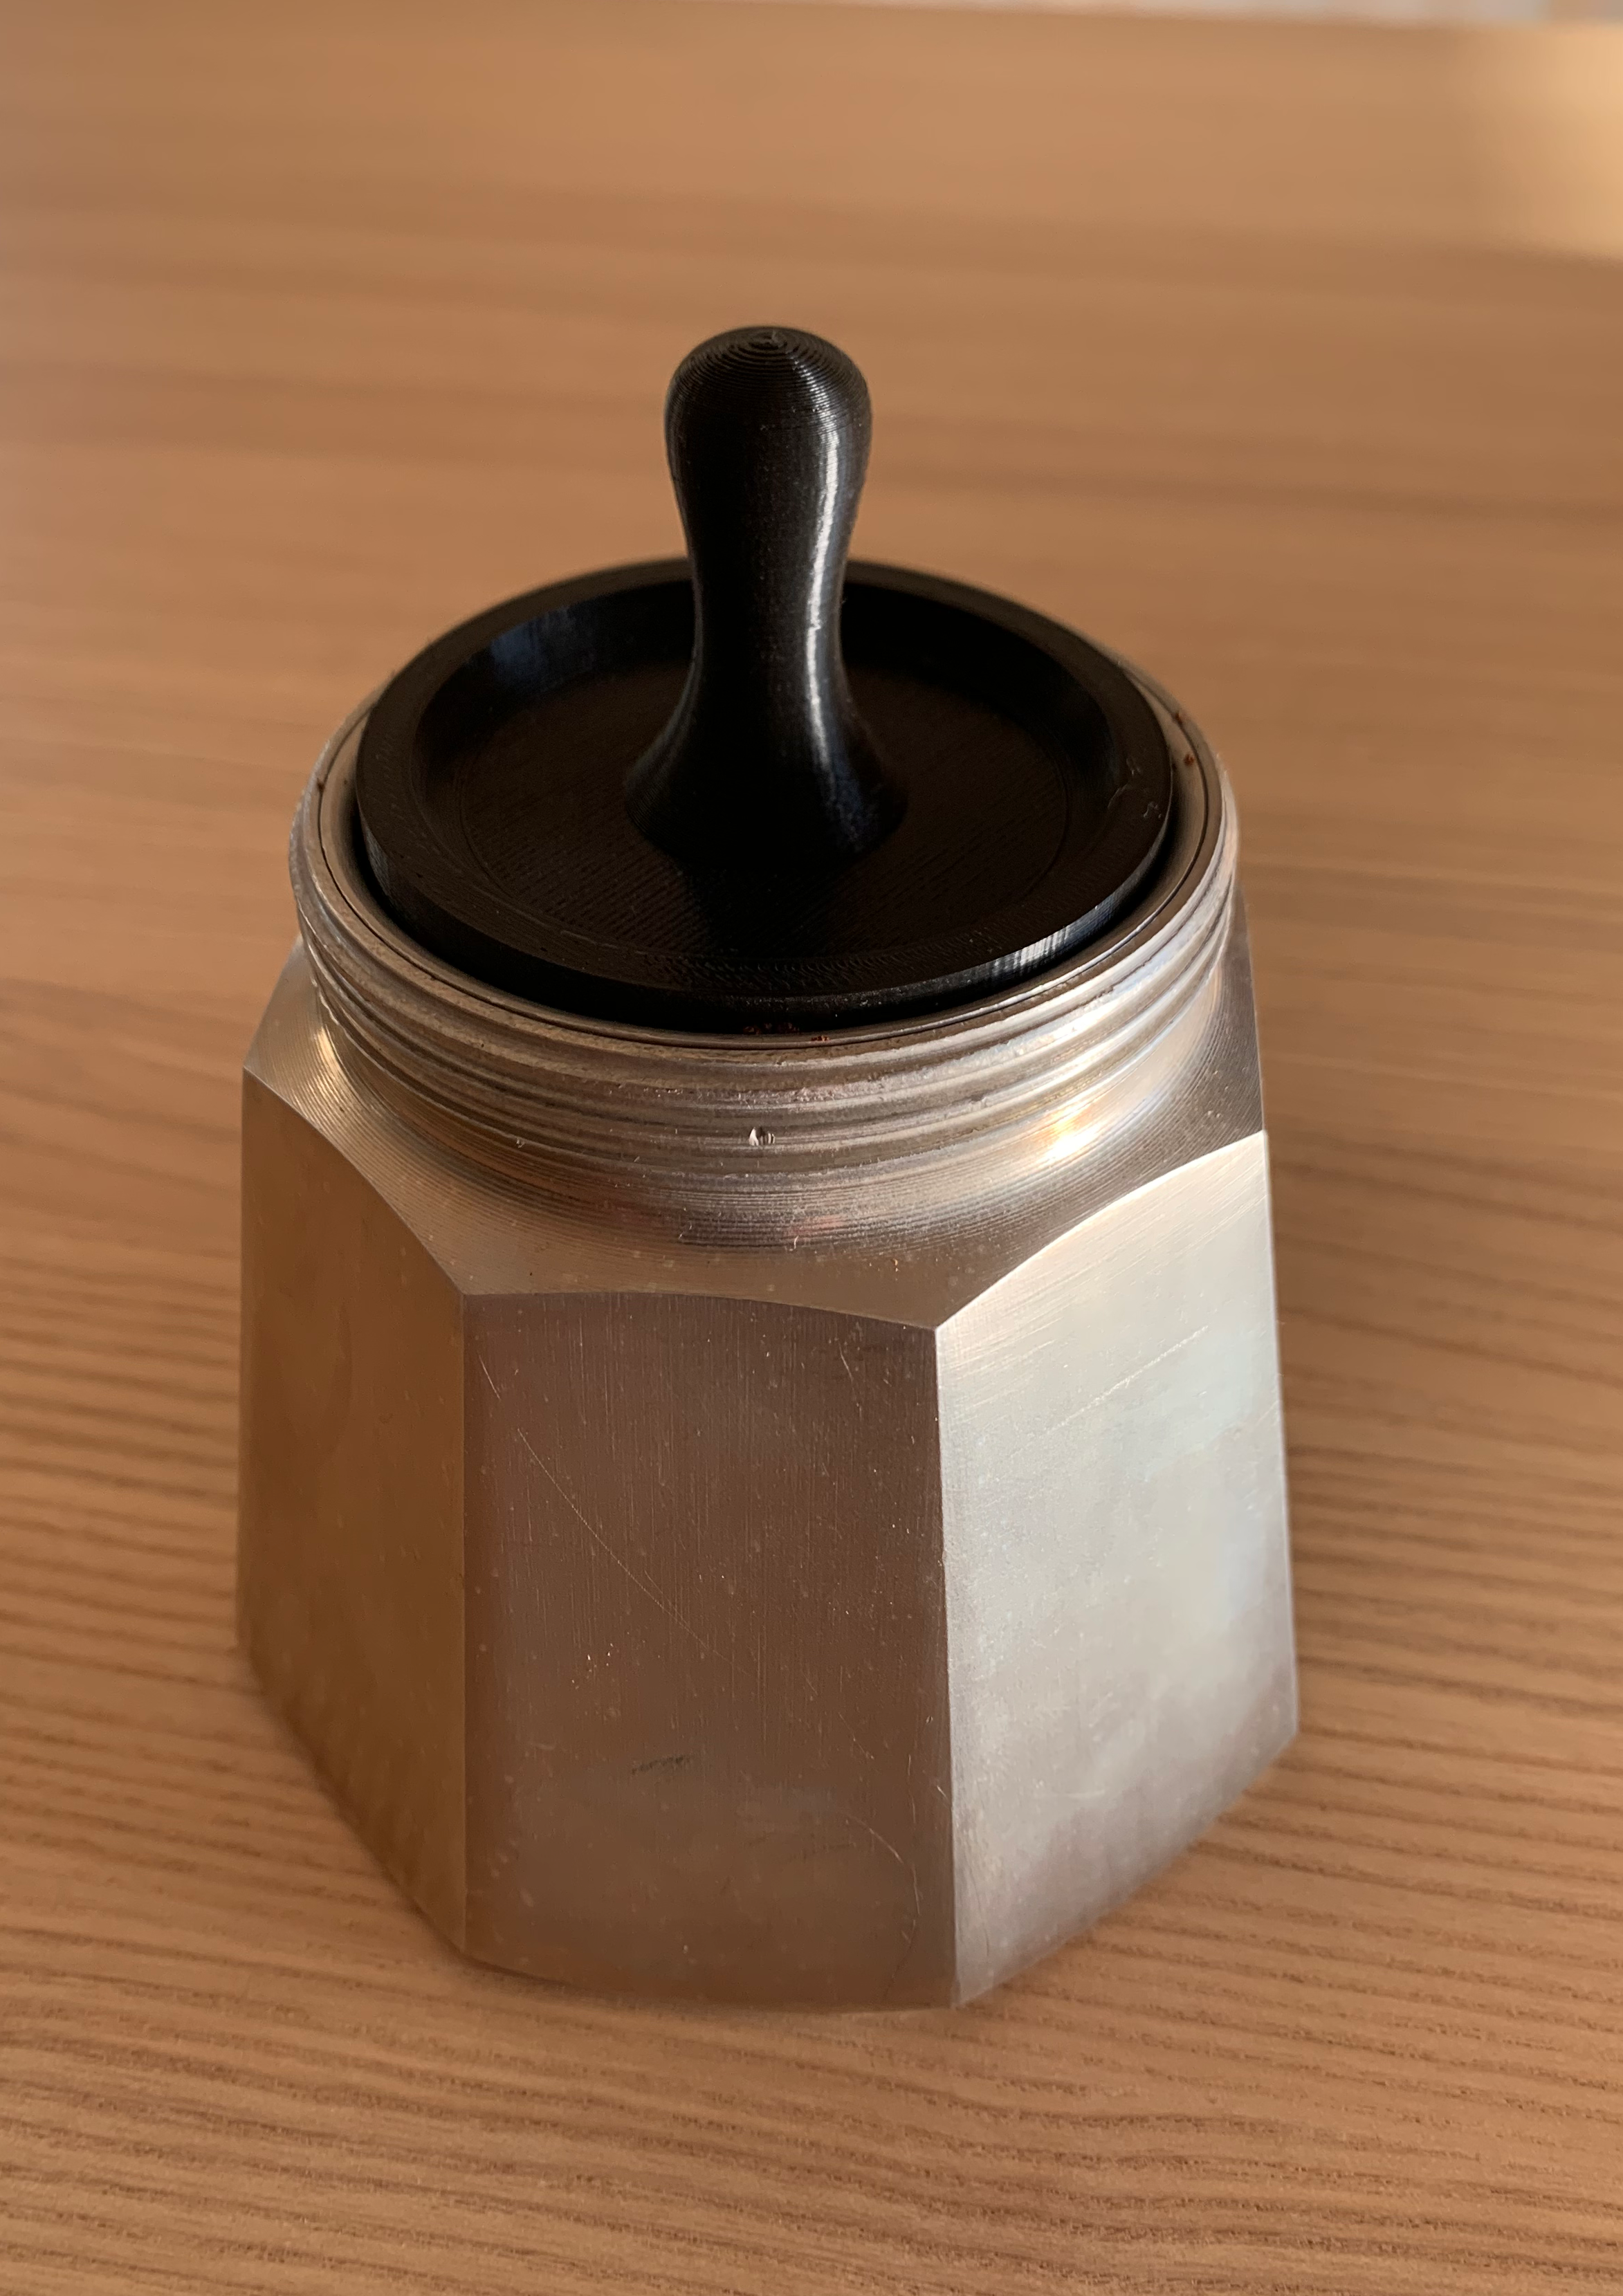 Coffee Tamper (for Bialetti Coffee Maker)